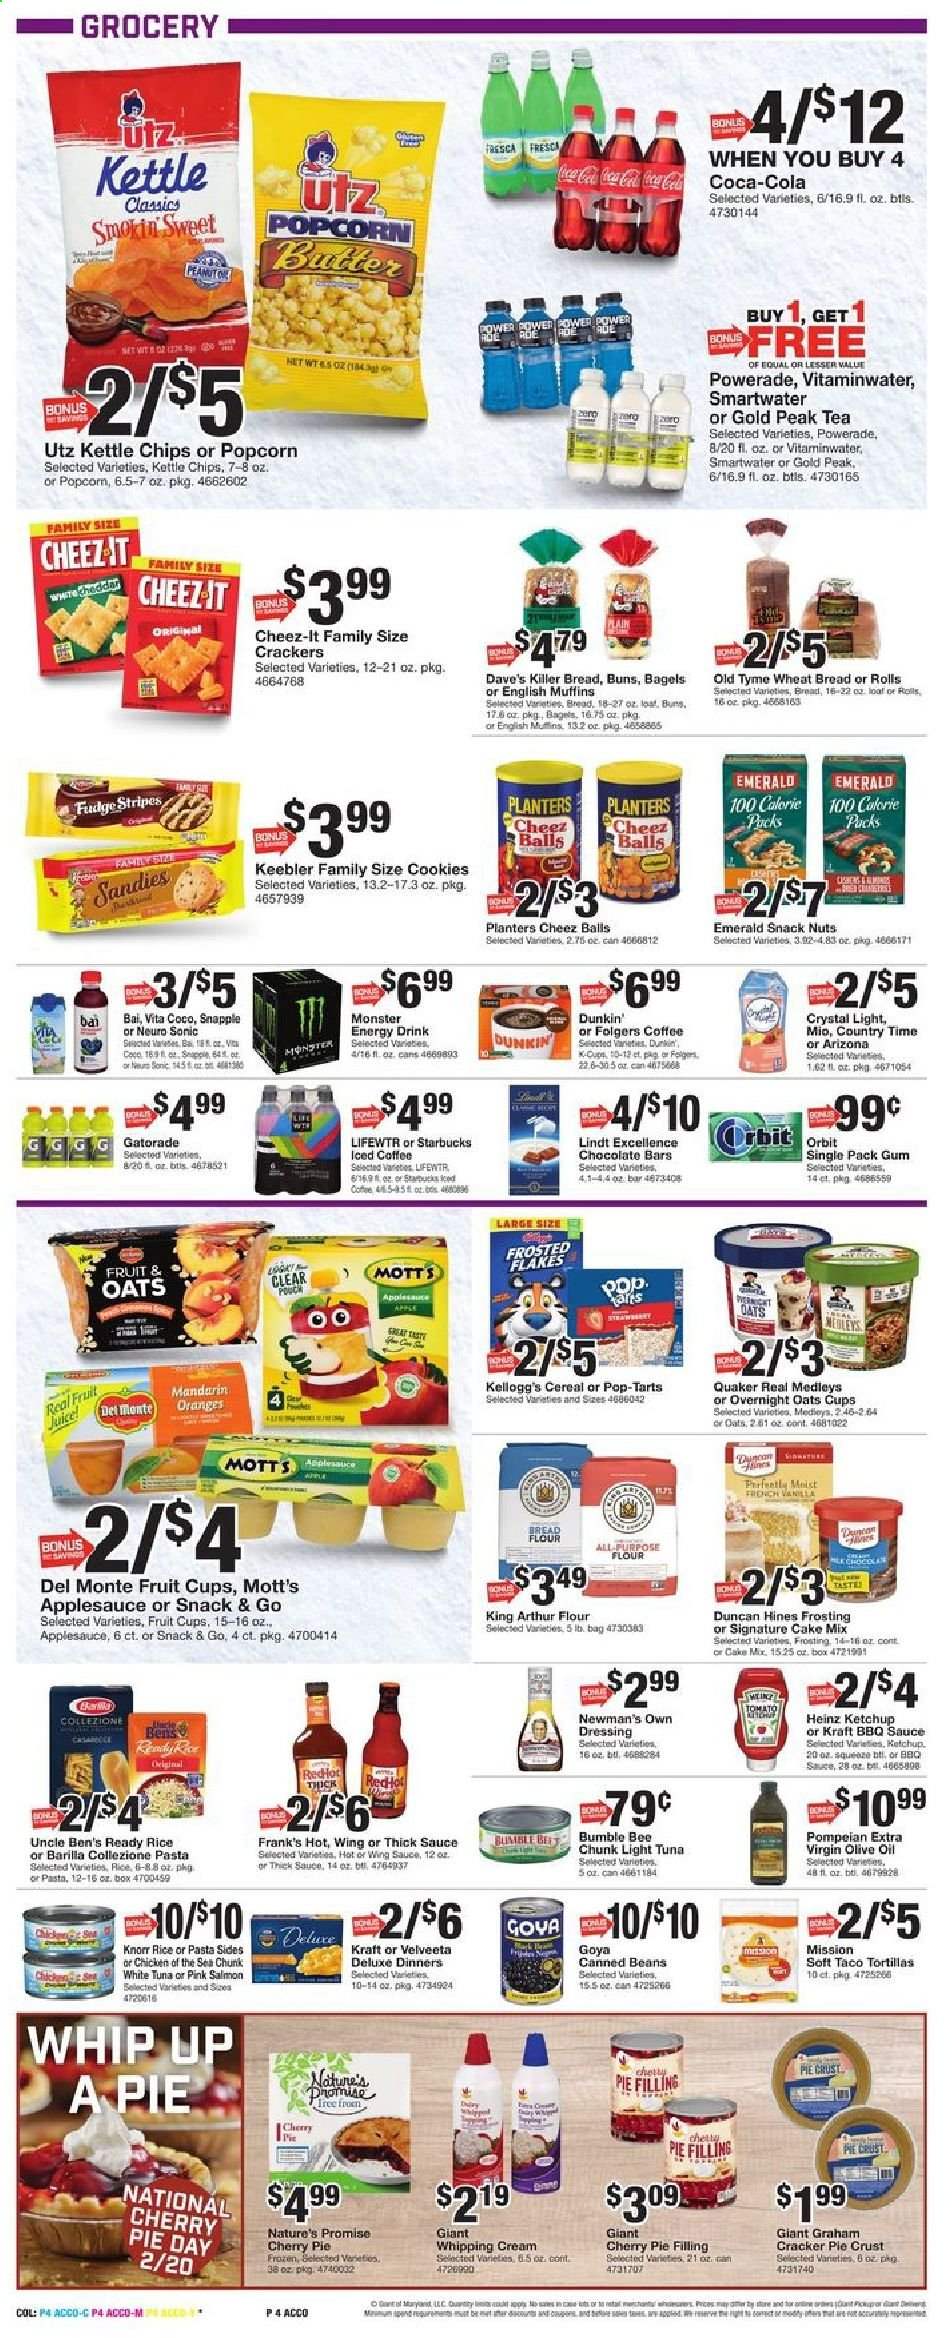 thumbnail - Giant Food Flyer - 02/19/2021 - 02/25/2021 - Sales products - fruit cup, tortillas, wheat bread, Nature’s Promise, bagels, cake mix, pie, buns, bread flour, oranges, salmon, tuna, Knorr, Barilla, Quaker, pasta sides, Kraft®, butter, whipping cream, beans, cookies, fudge, chocolate, Orbit, Lindt, crackers, Kellogg's, Pop-Tarts, Keebler, snack, popcorn, Cheez-It, all purpose flour, flour, frosting, pie crust, pie filling, cherry pie filling, oats, mandarines, Heinz, light tuna, Uncle Ben's, Chicken of the Sea, Goya, cereals, Frosted Flakes, pasta, BBQ sauce, ketchup, dressing, wing sauce, olive oil, apple sauce, Planters, Coca-Cola, Powerade, juice, fruit juice, energy drink, Monster, AriZona, Snapple, Gold Peak Tea, Bai, Mott's, Country Time, Gatorade, Lifewtr, iced coffee, tea, Starbucks, Folgers. Page 5.